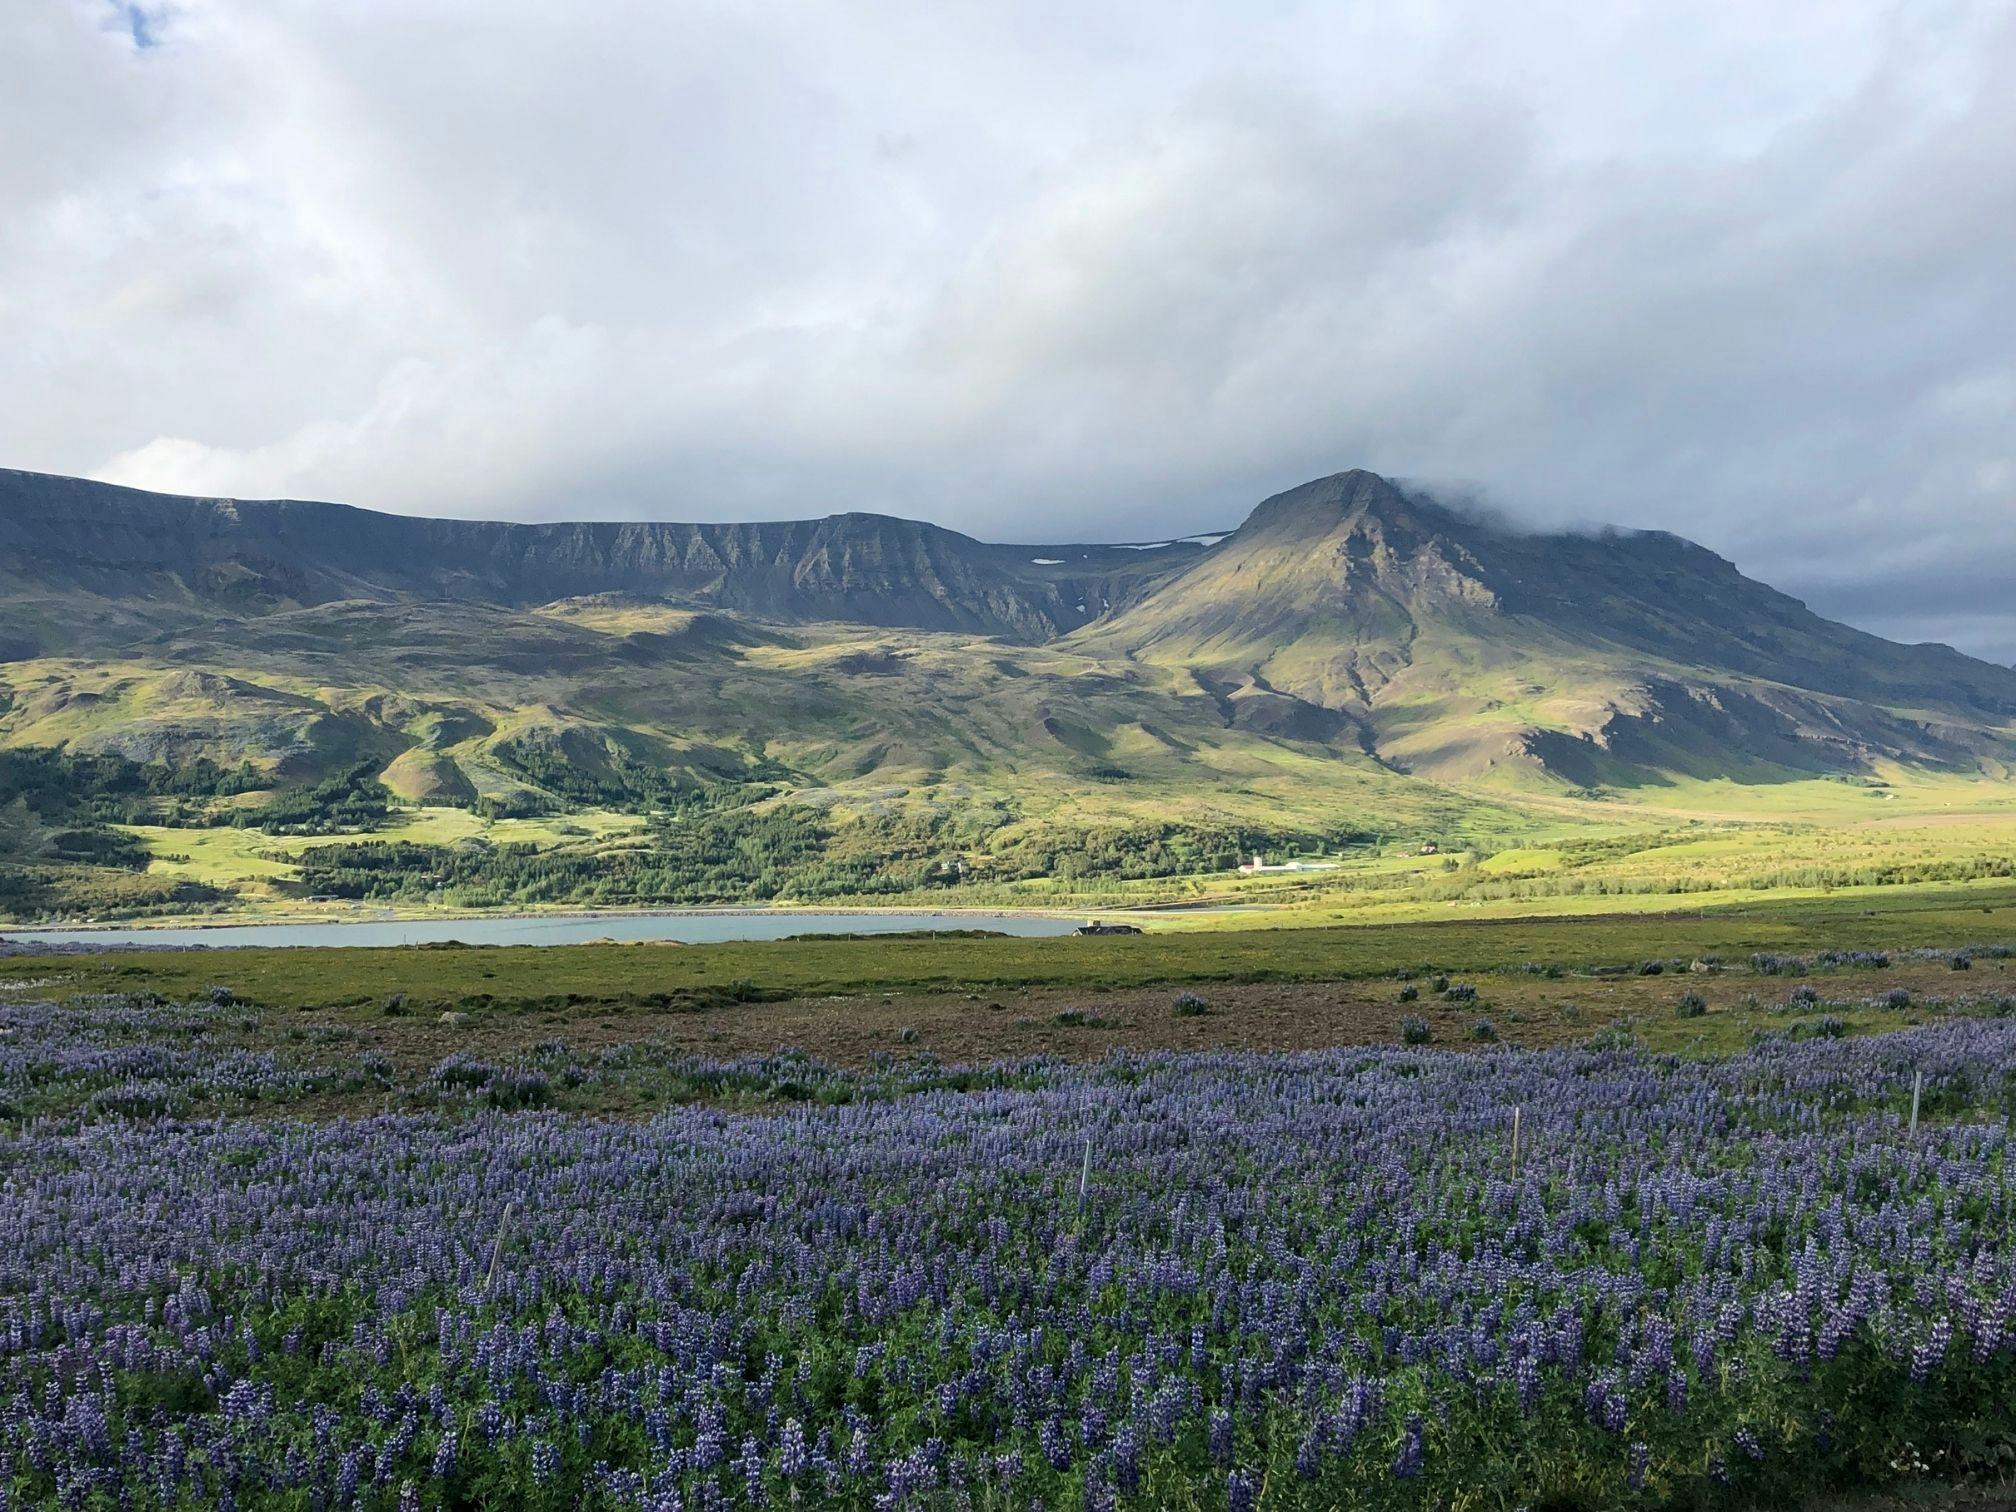 A scenic landscape showing a field of purple flowers, a lake and a majestic mountain under a cloudy sky